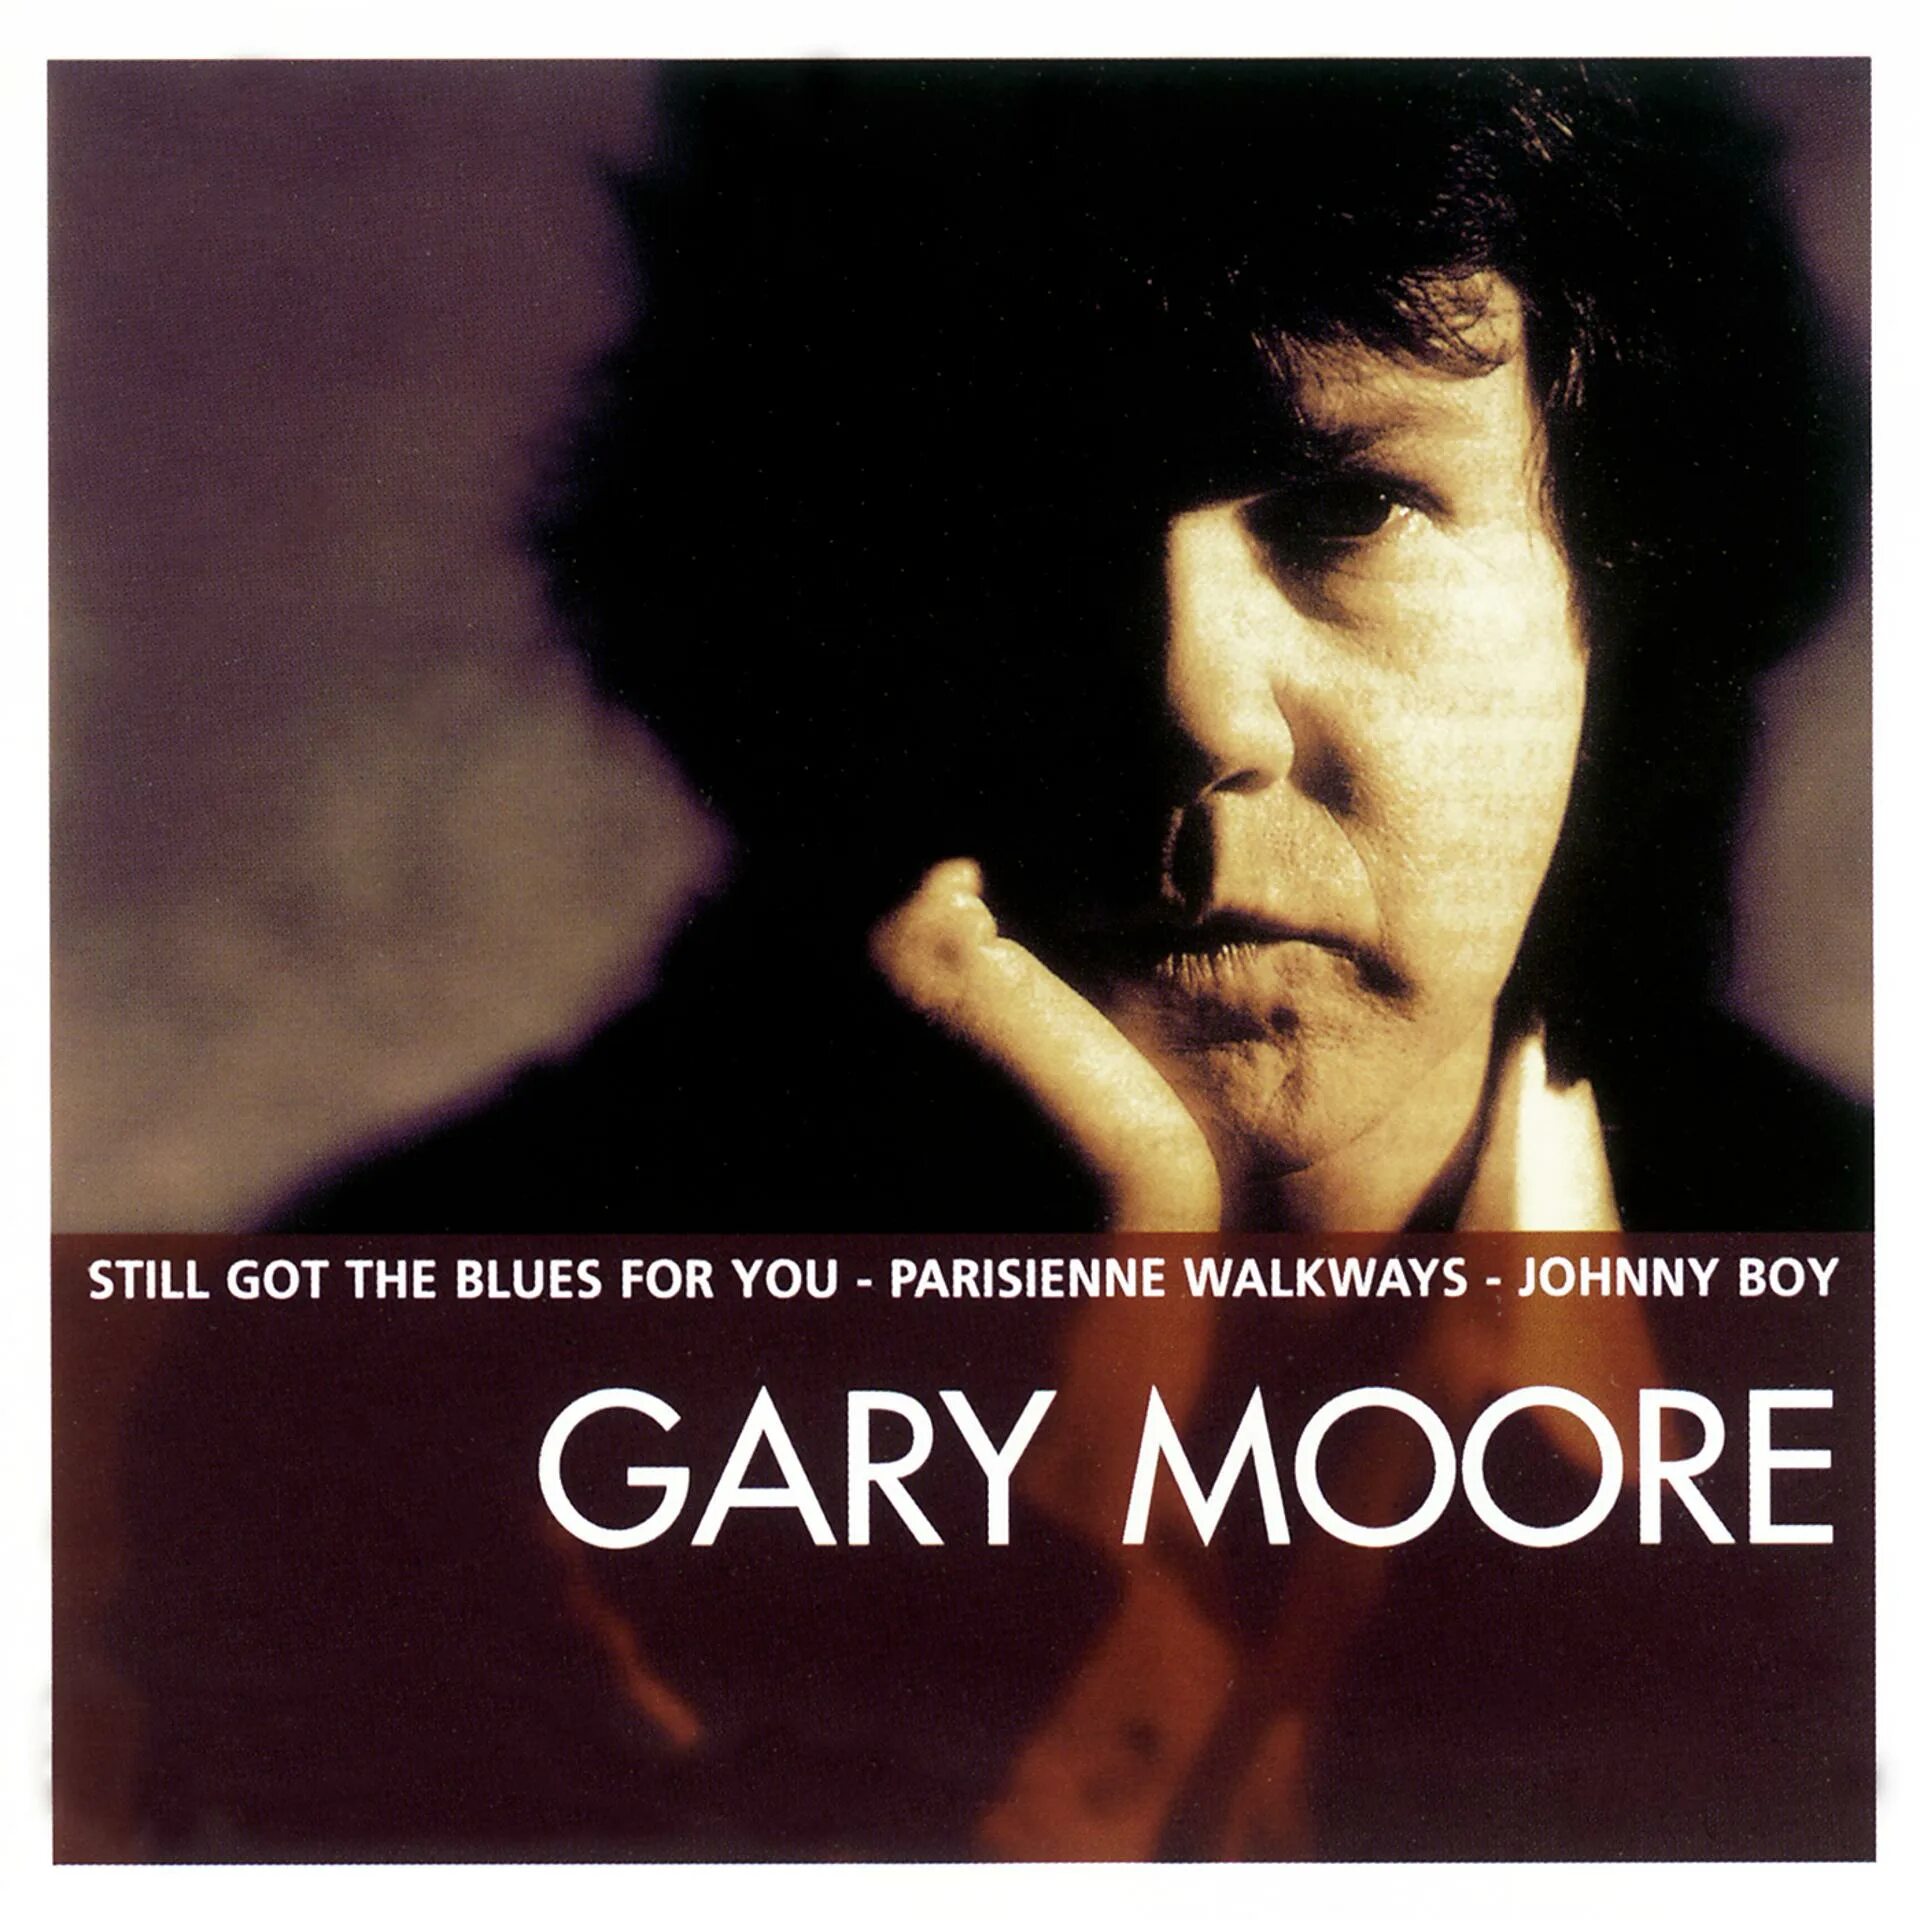 Gary Moore. Essential Гэри Мур. Gary Moore one Day. The Blues collection Гэри Мур.